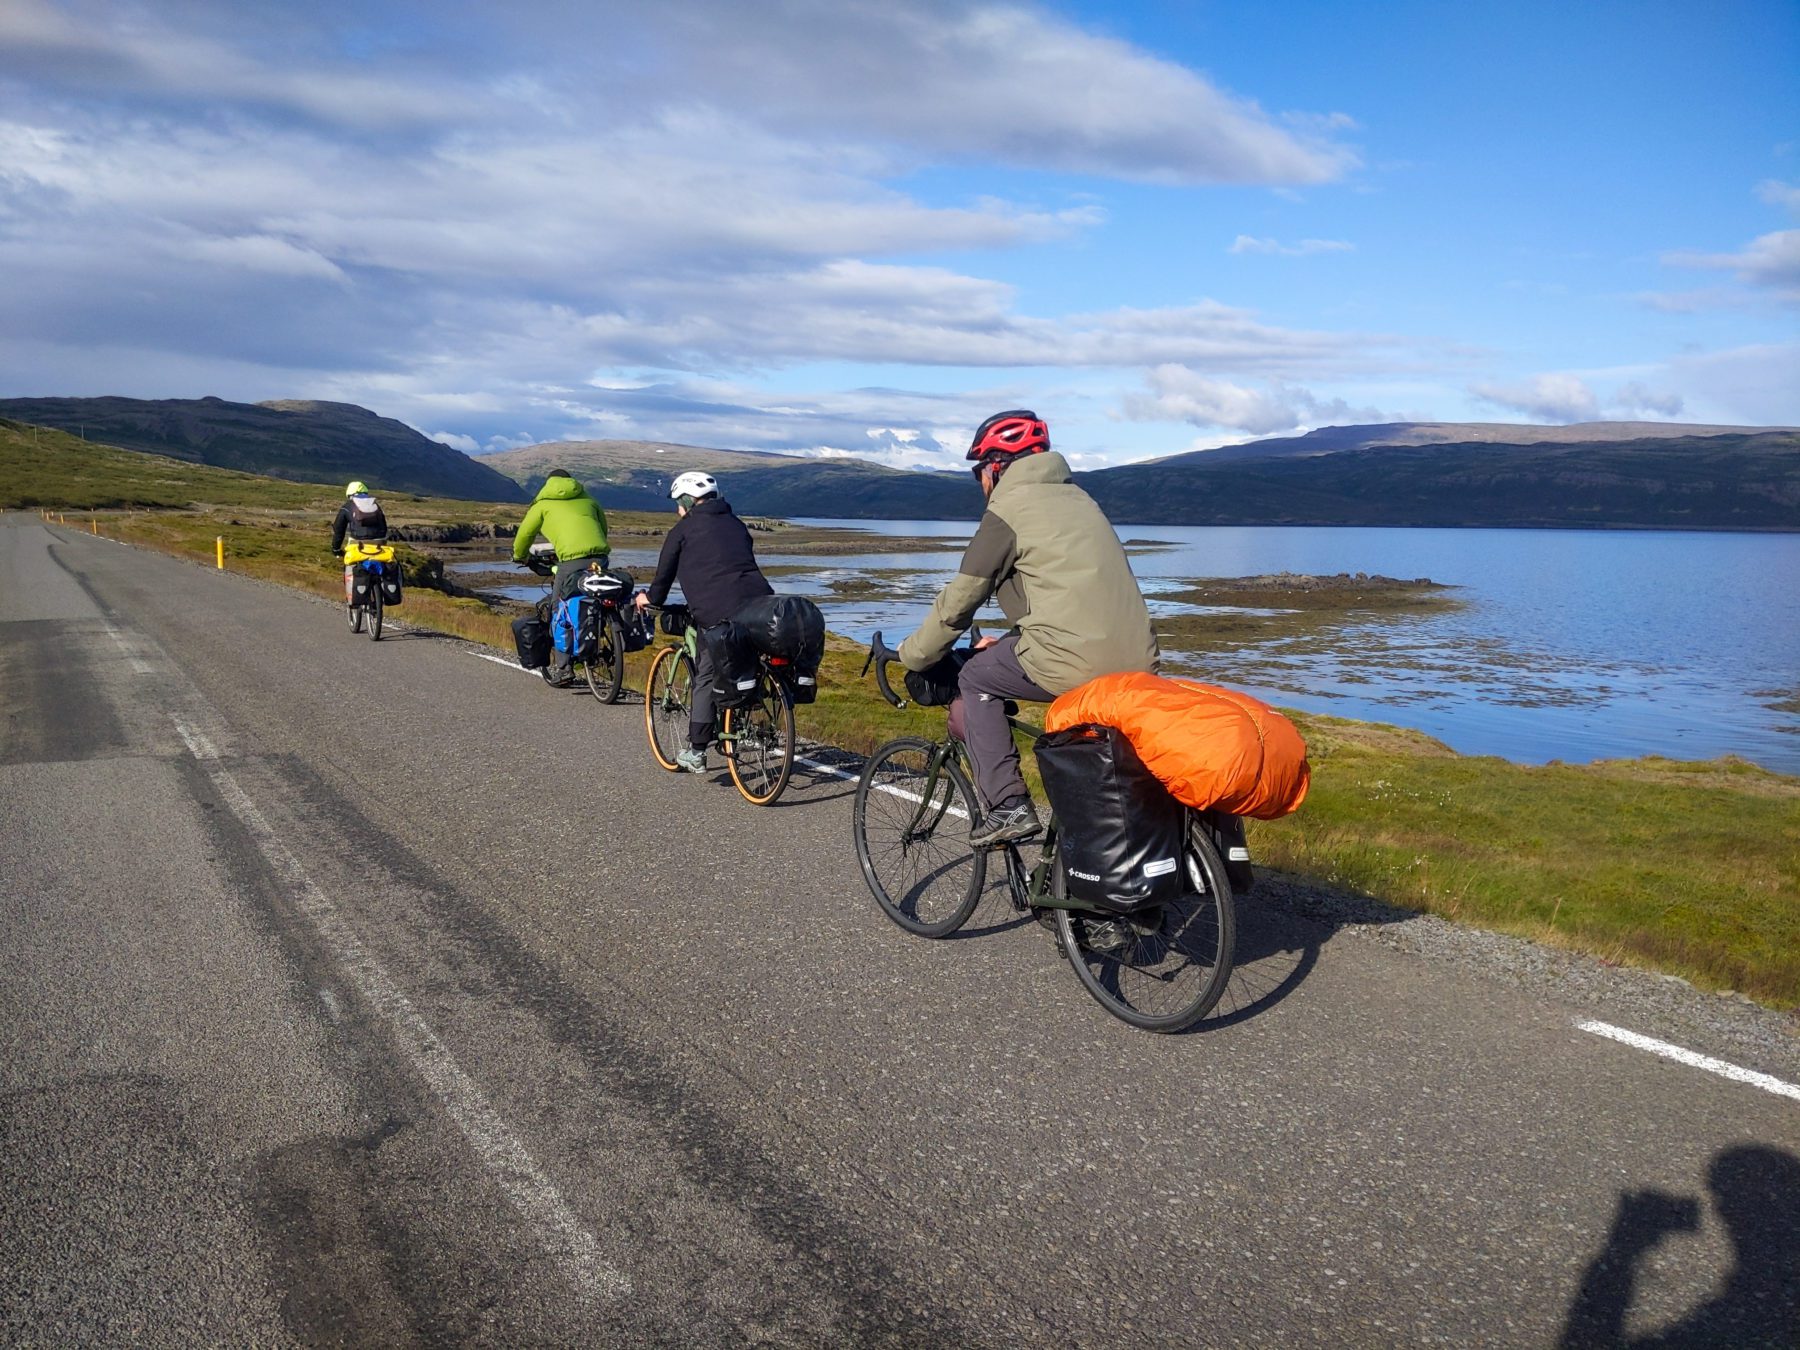 Group of bicyclists on the side of the road in Iceland.